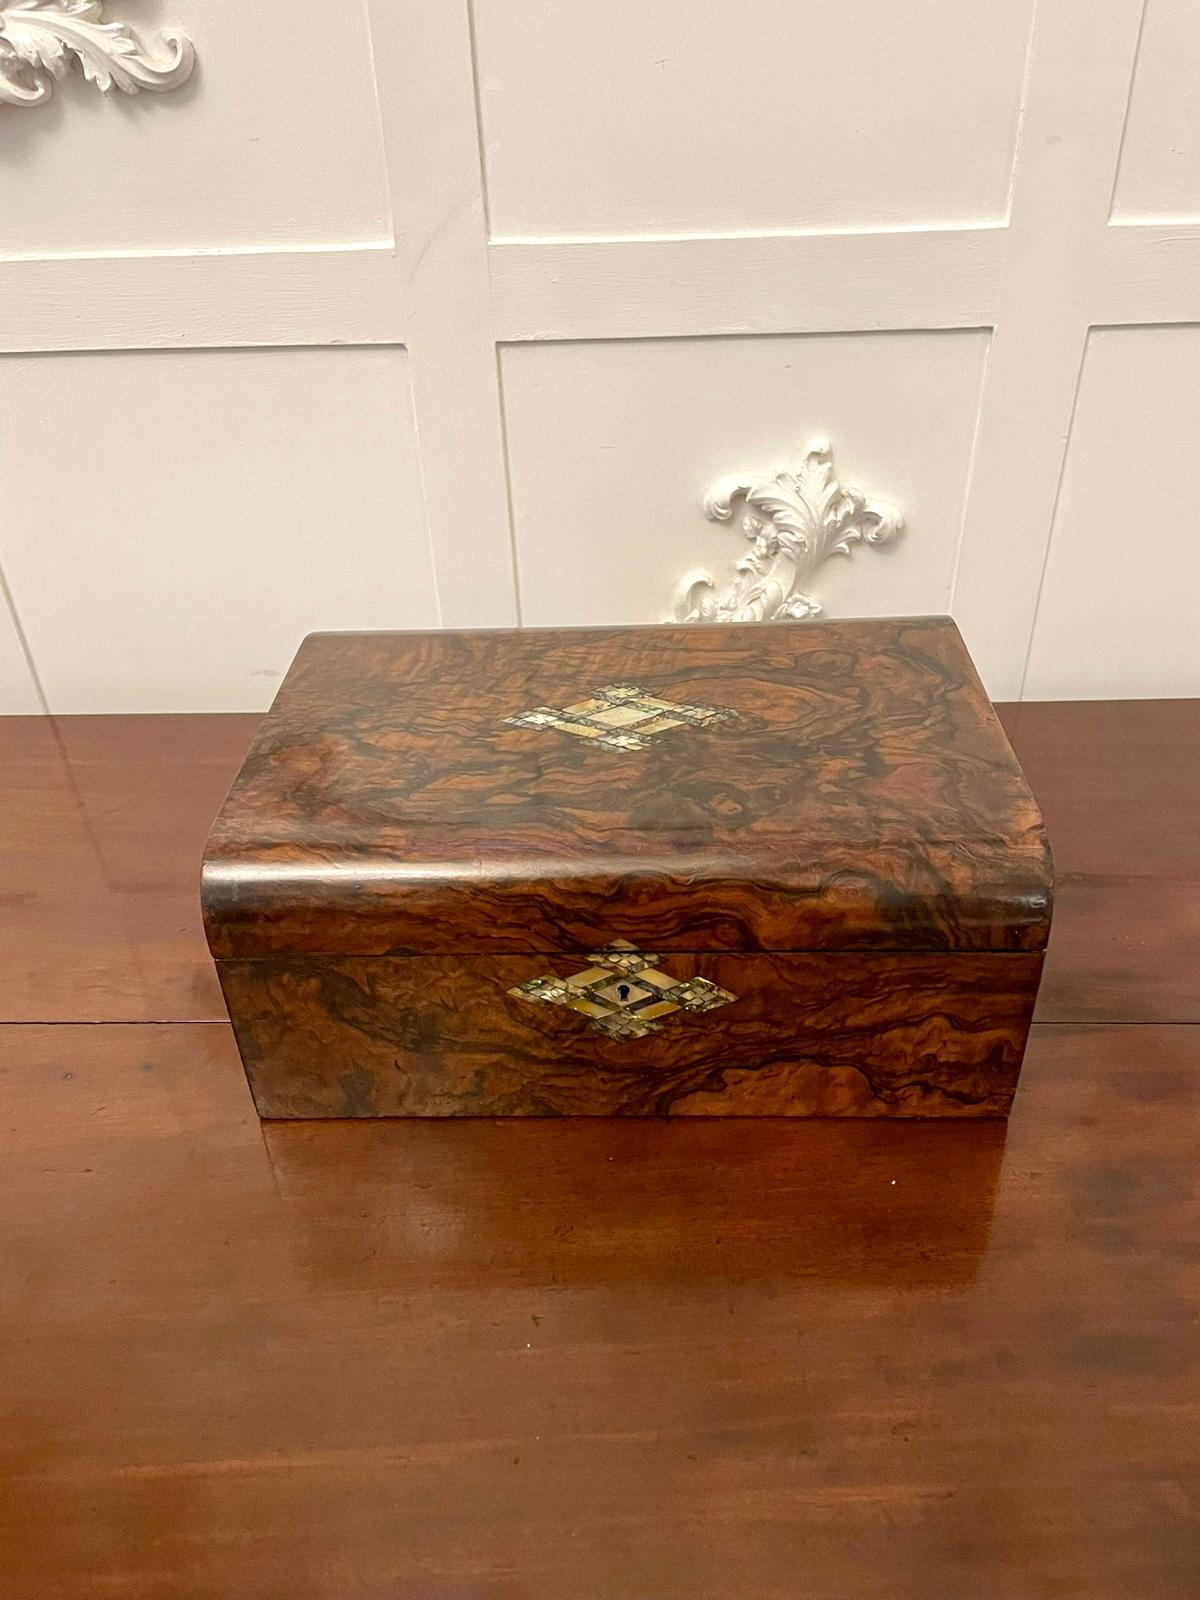 Antique Victorian quality burr walnut writing box opening to reveal a writing surface, original pair of glass inkwells, pen tray and secret drawers 

A superb example in wonderful original condition 

H 15 x W 35.2 x D 24.5cm
Date 1850
